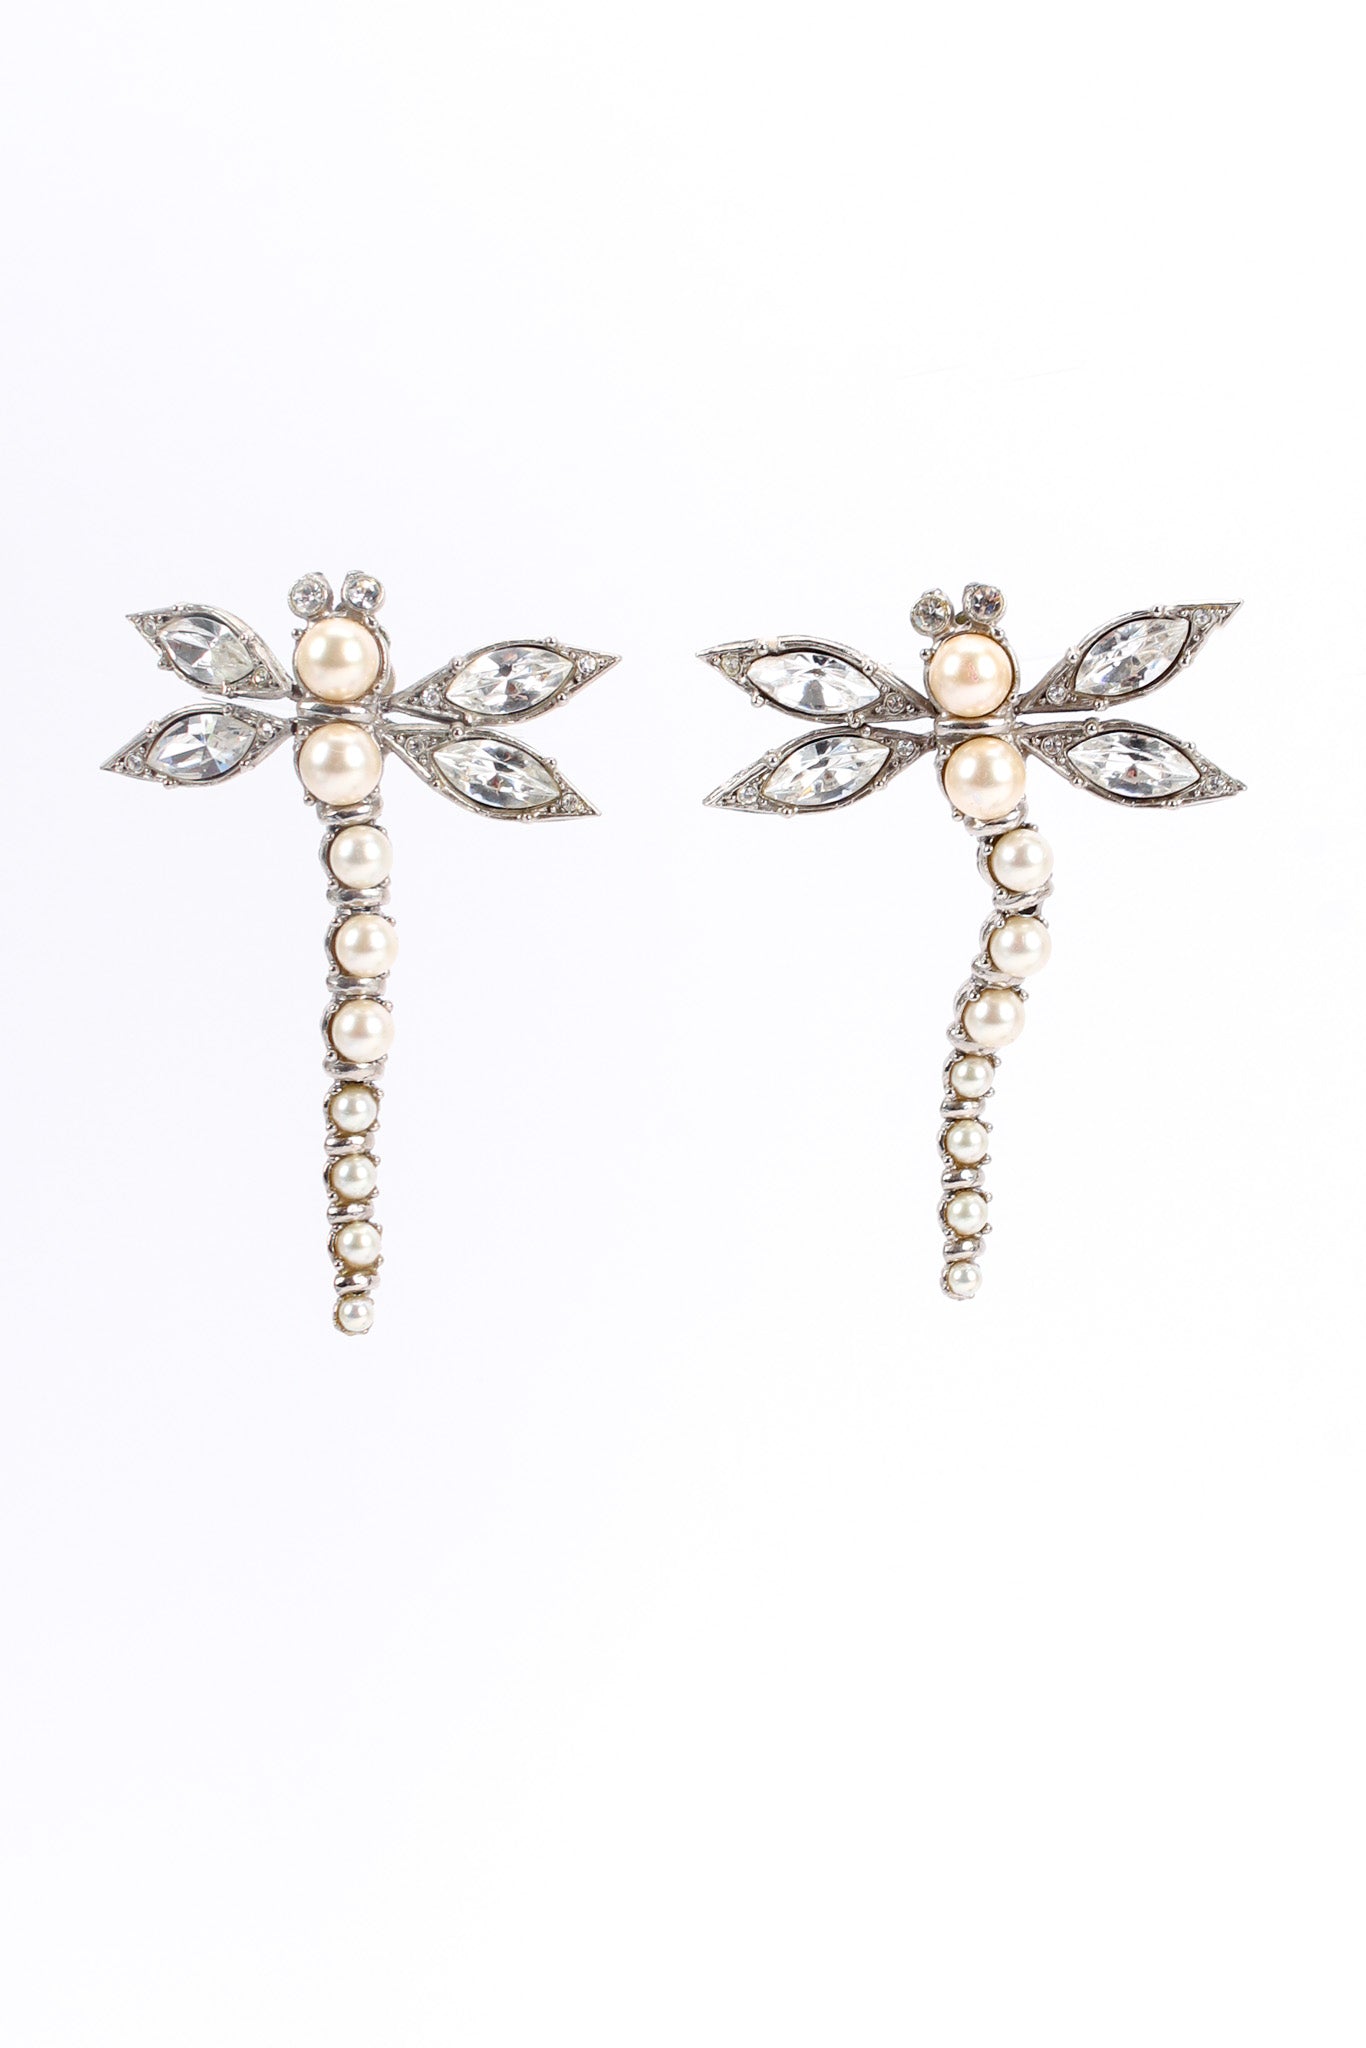 Vintage Christian Dior Crystal Pearl Dragonfly Earrings front hang @ Recess LA